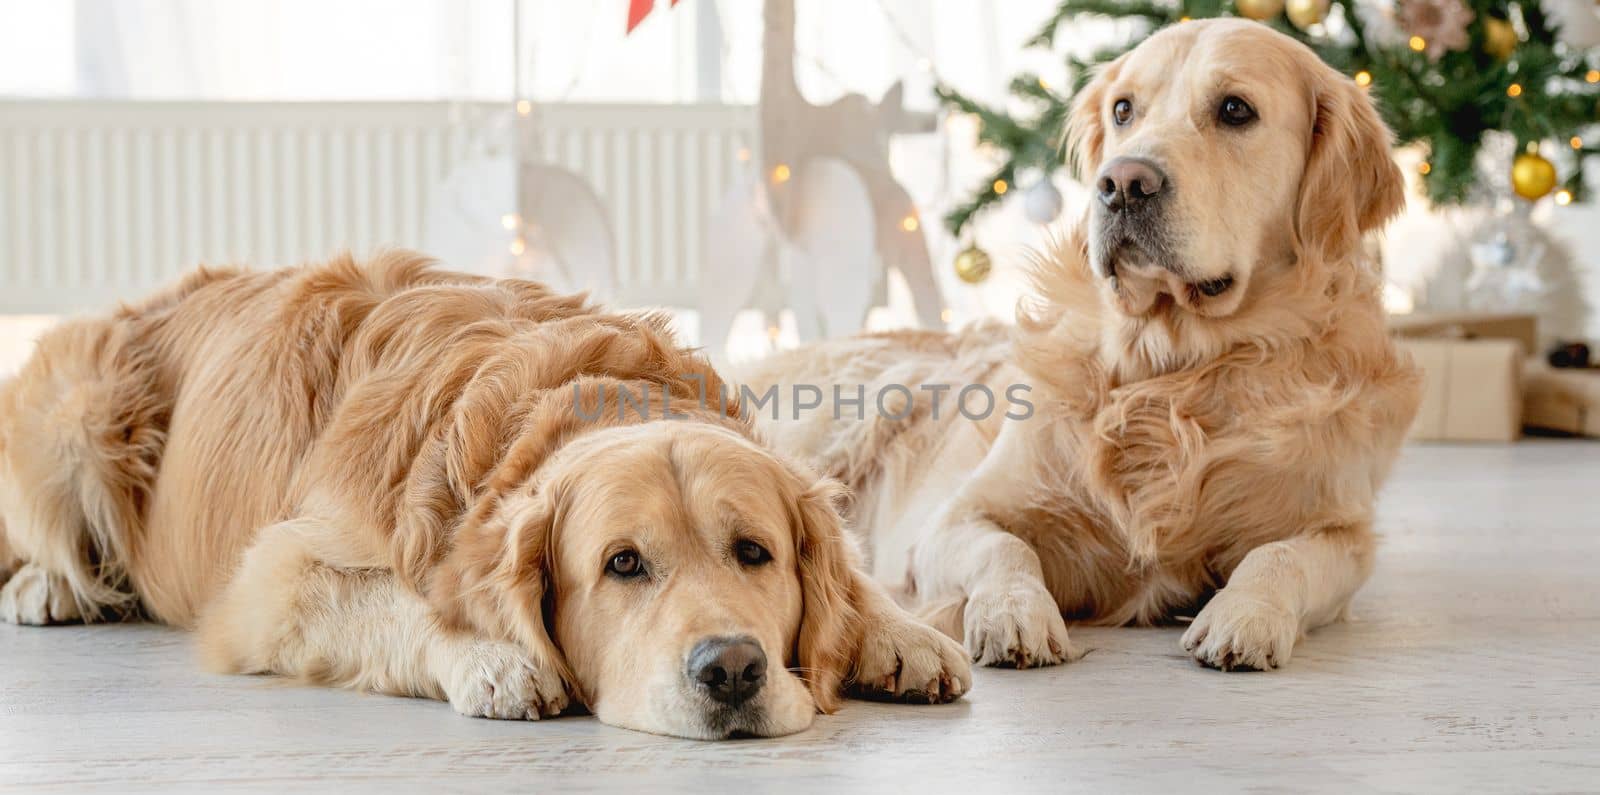 Golden retriever dogs in Christmas time lying on floor with XMas festive tree on background. Purebred doggy pets on New Year holidays